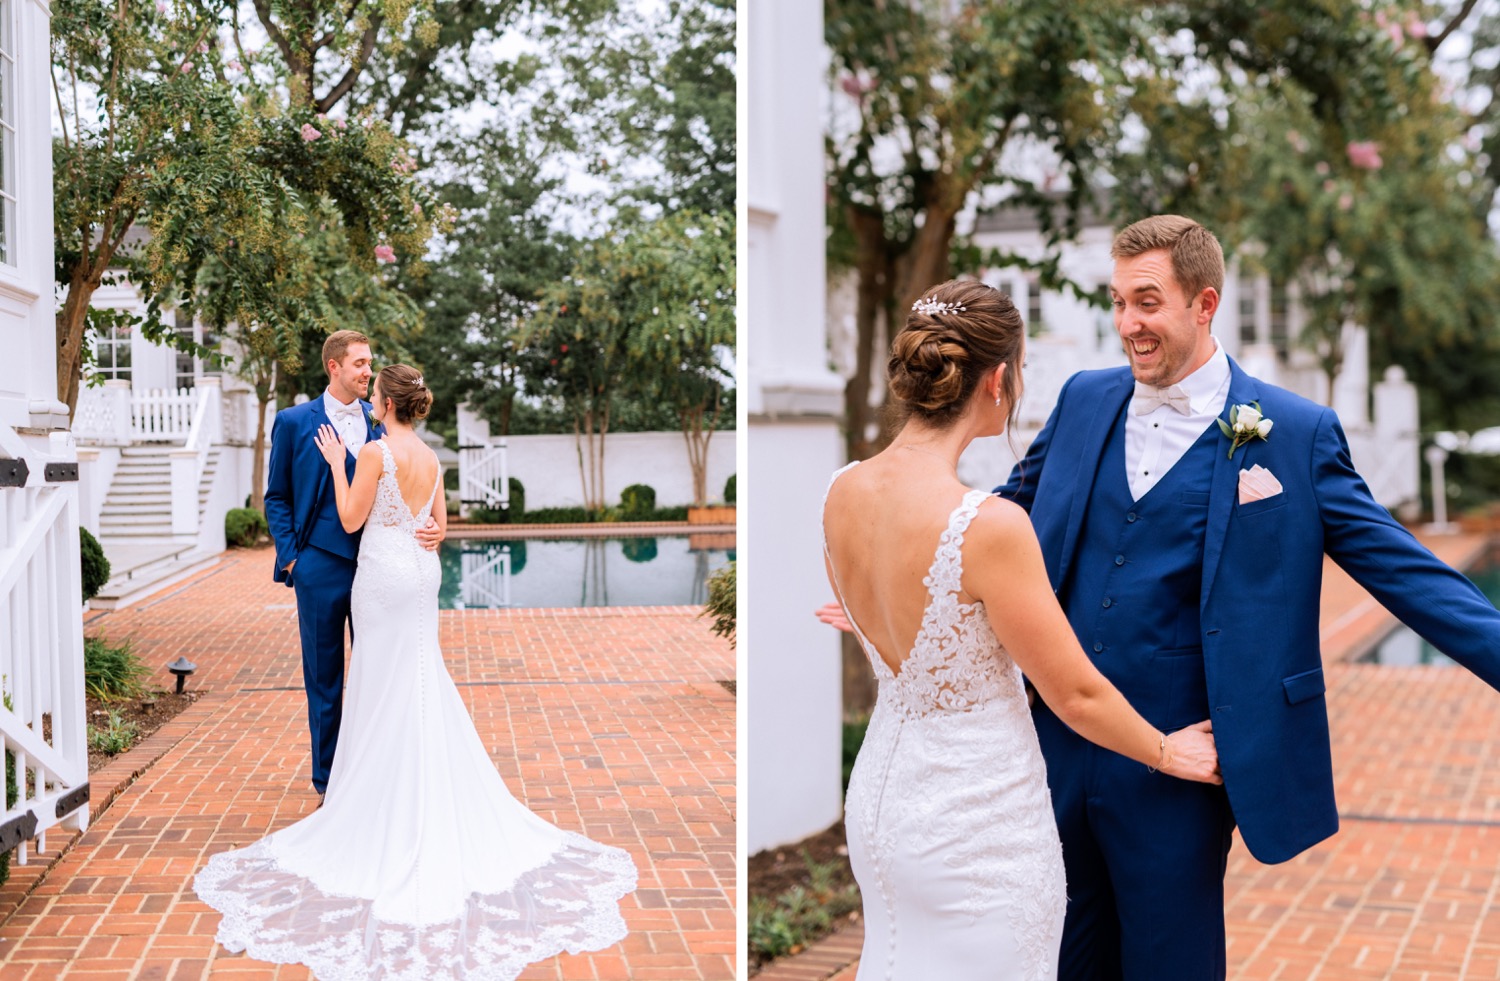 bride and groom share an intimate first look together before their wedding ceremony